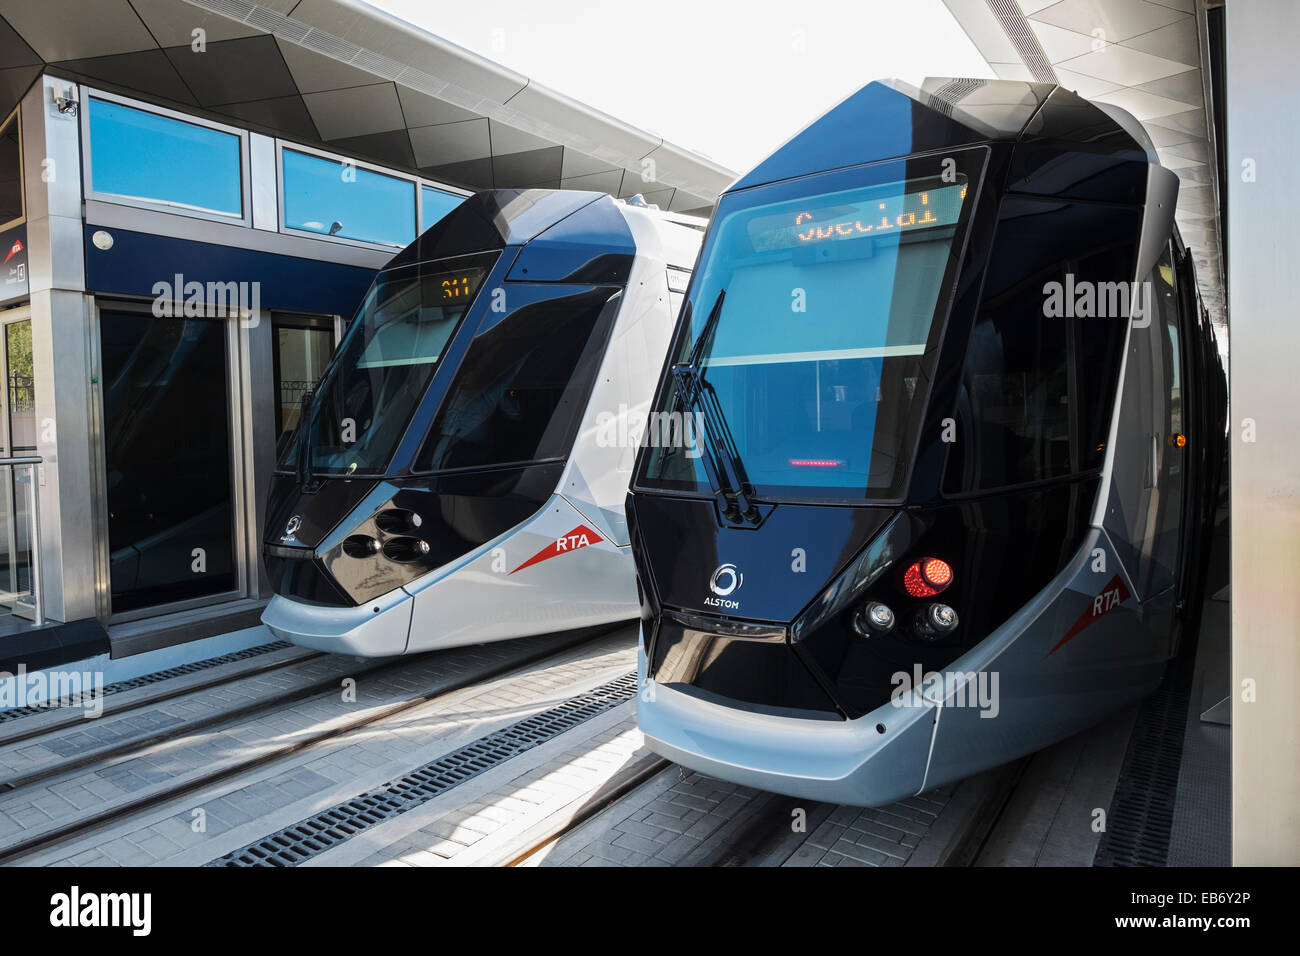 Station and trams on new Dubai Tram system in Marina district of Dubai United Arab Emirates Stock Photo